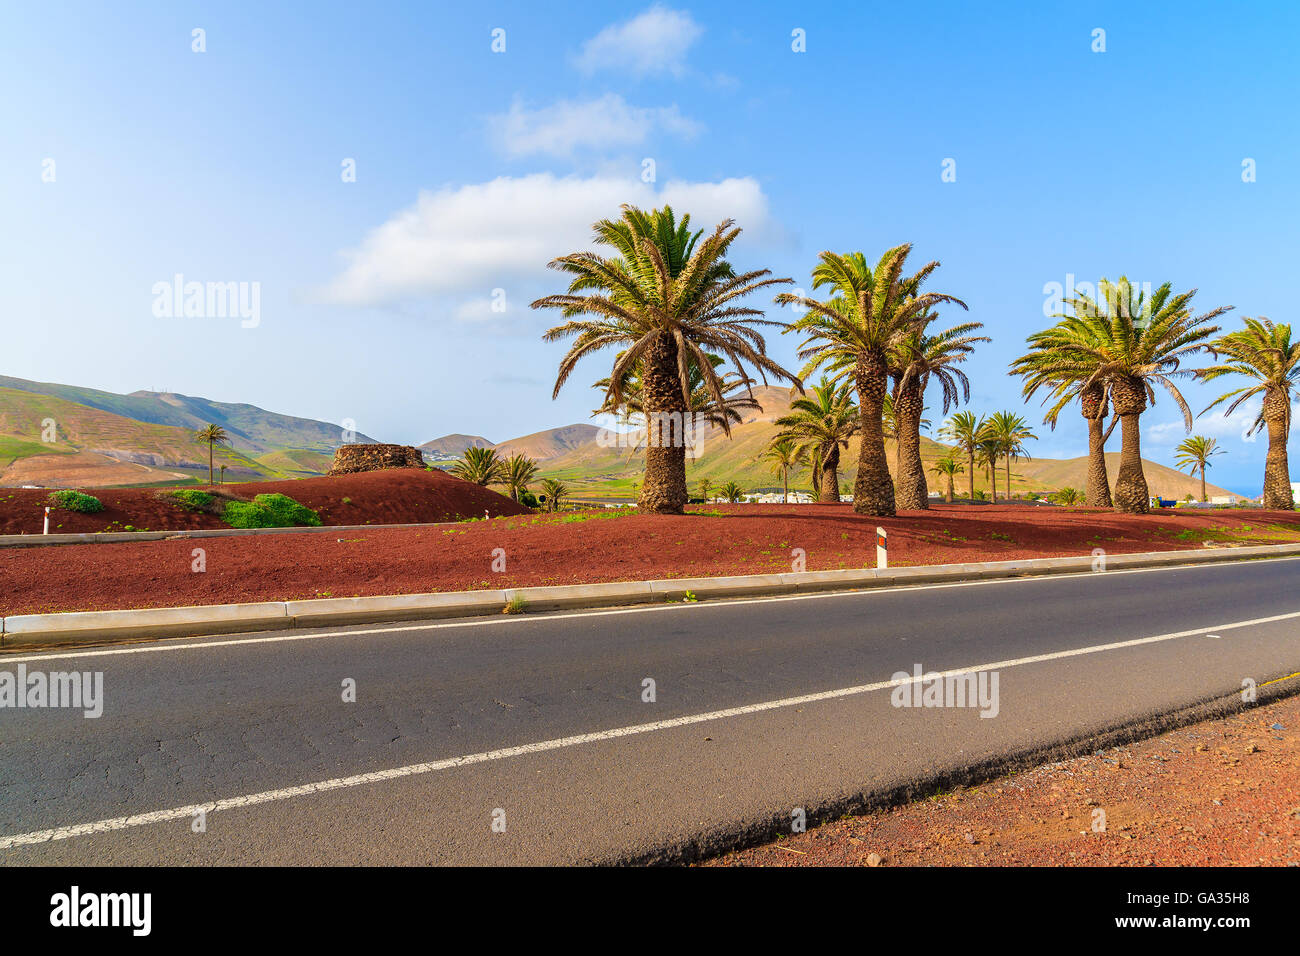 Scenic road in countryside landscape of Lanzarote island, Spain Stock Photo